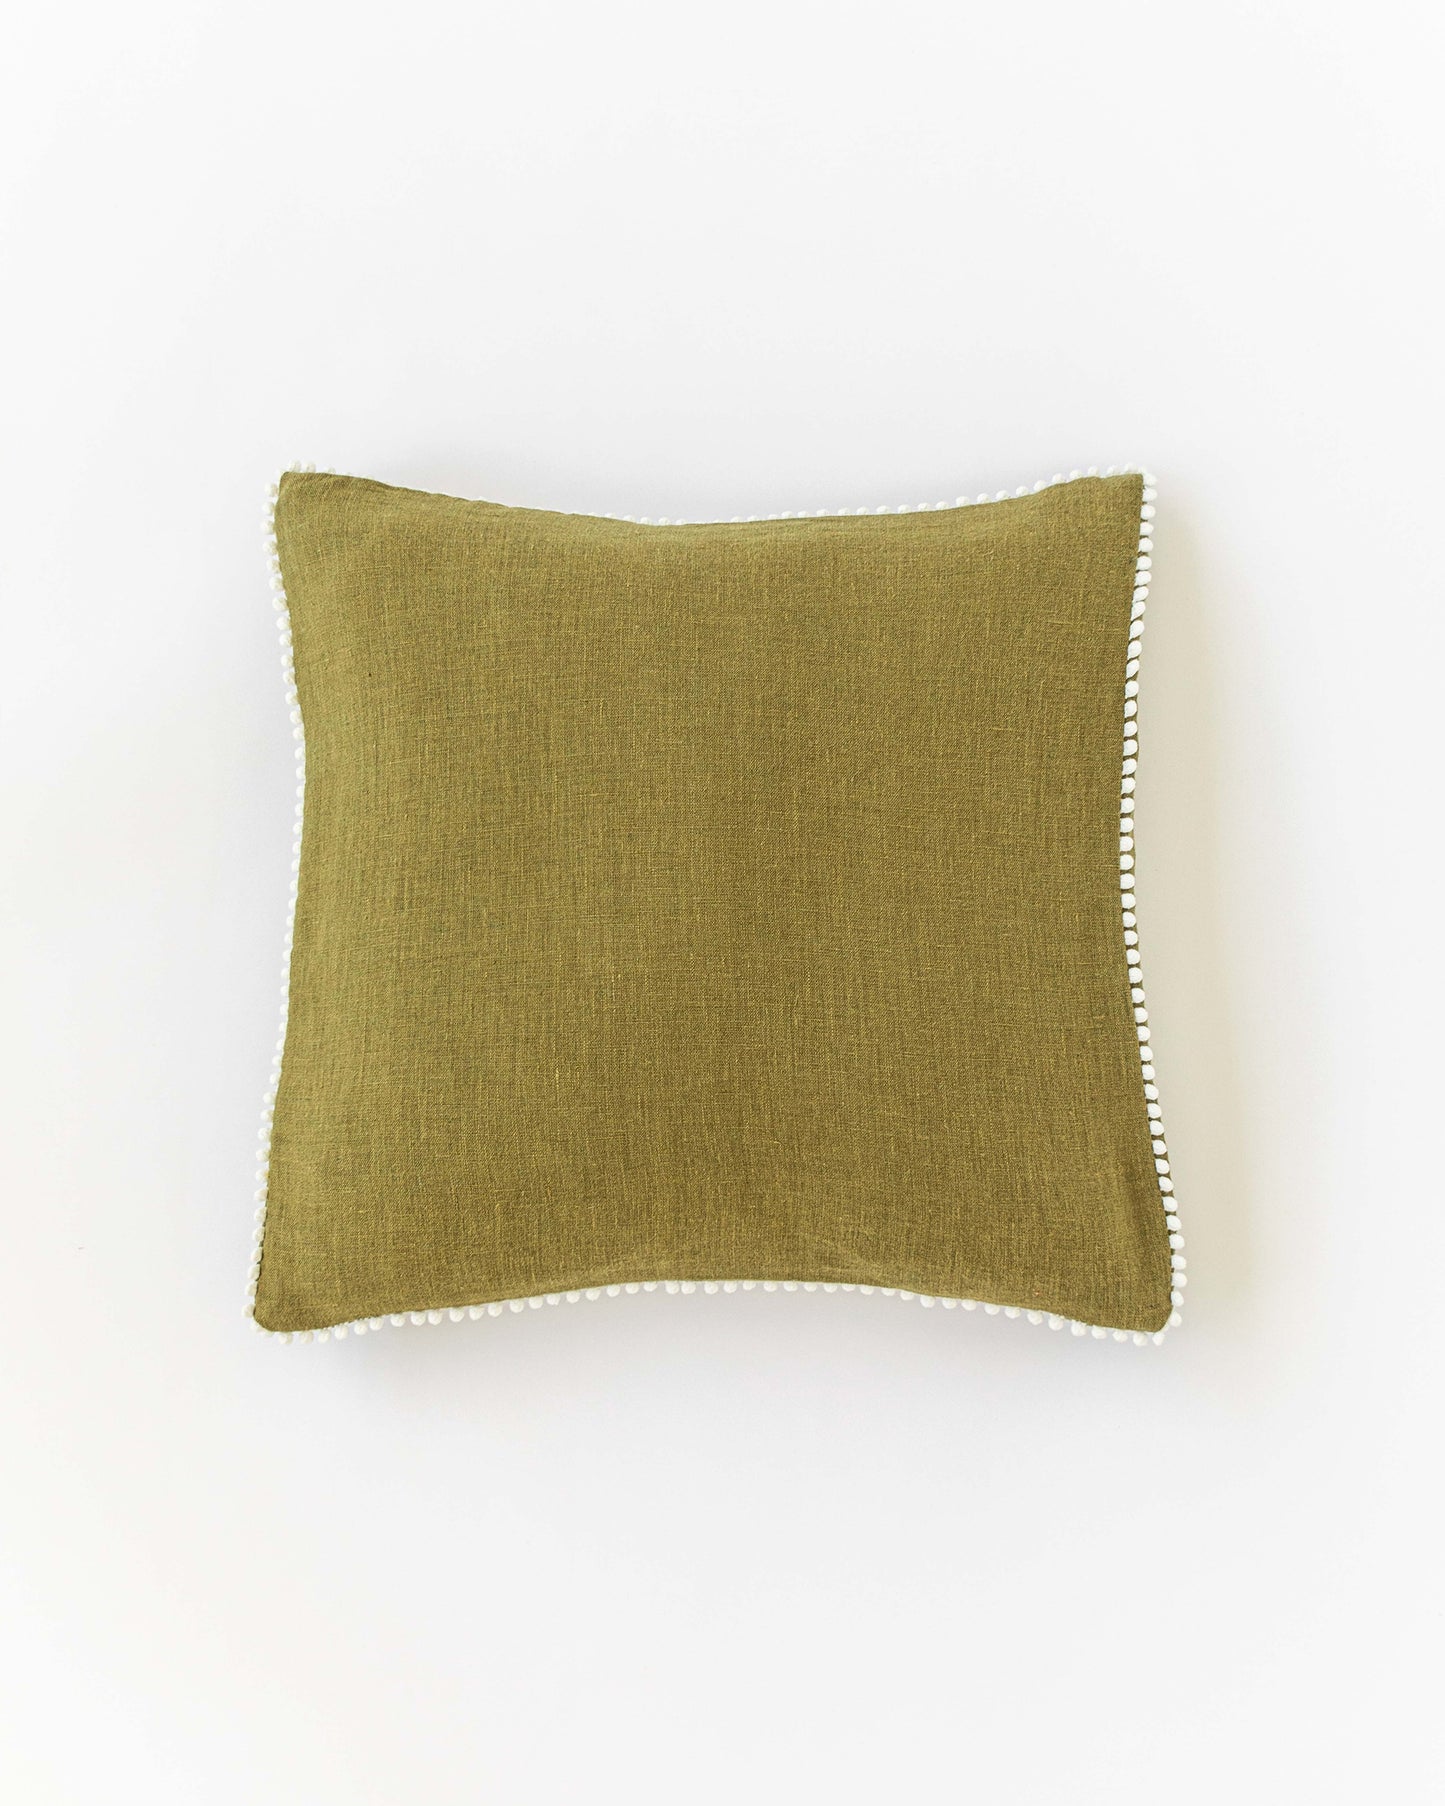 Cushion cover with pom poms in Olive green - MagicLinen